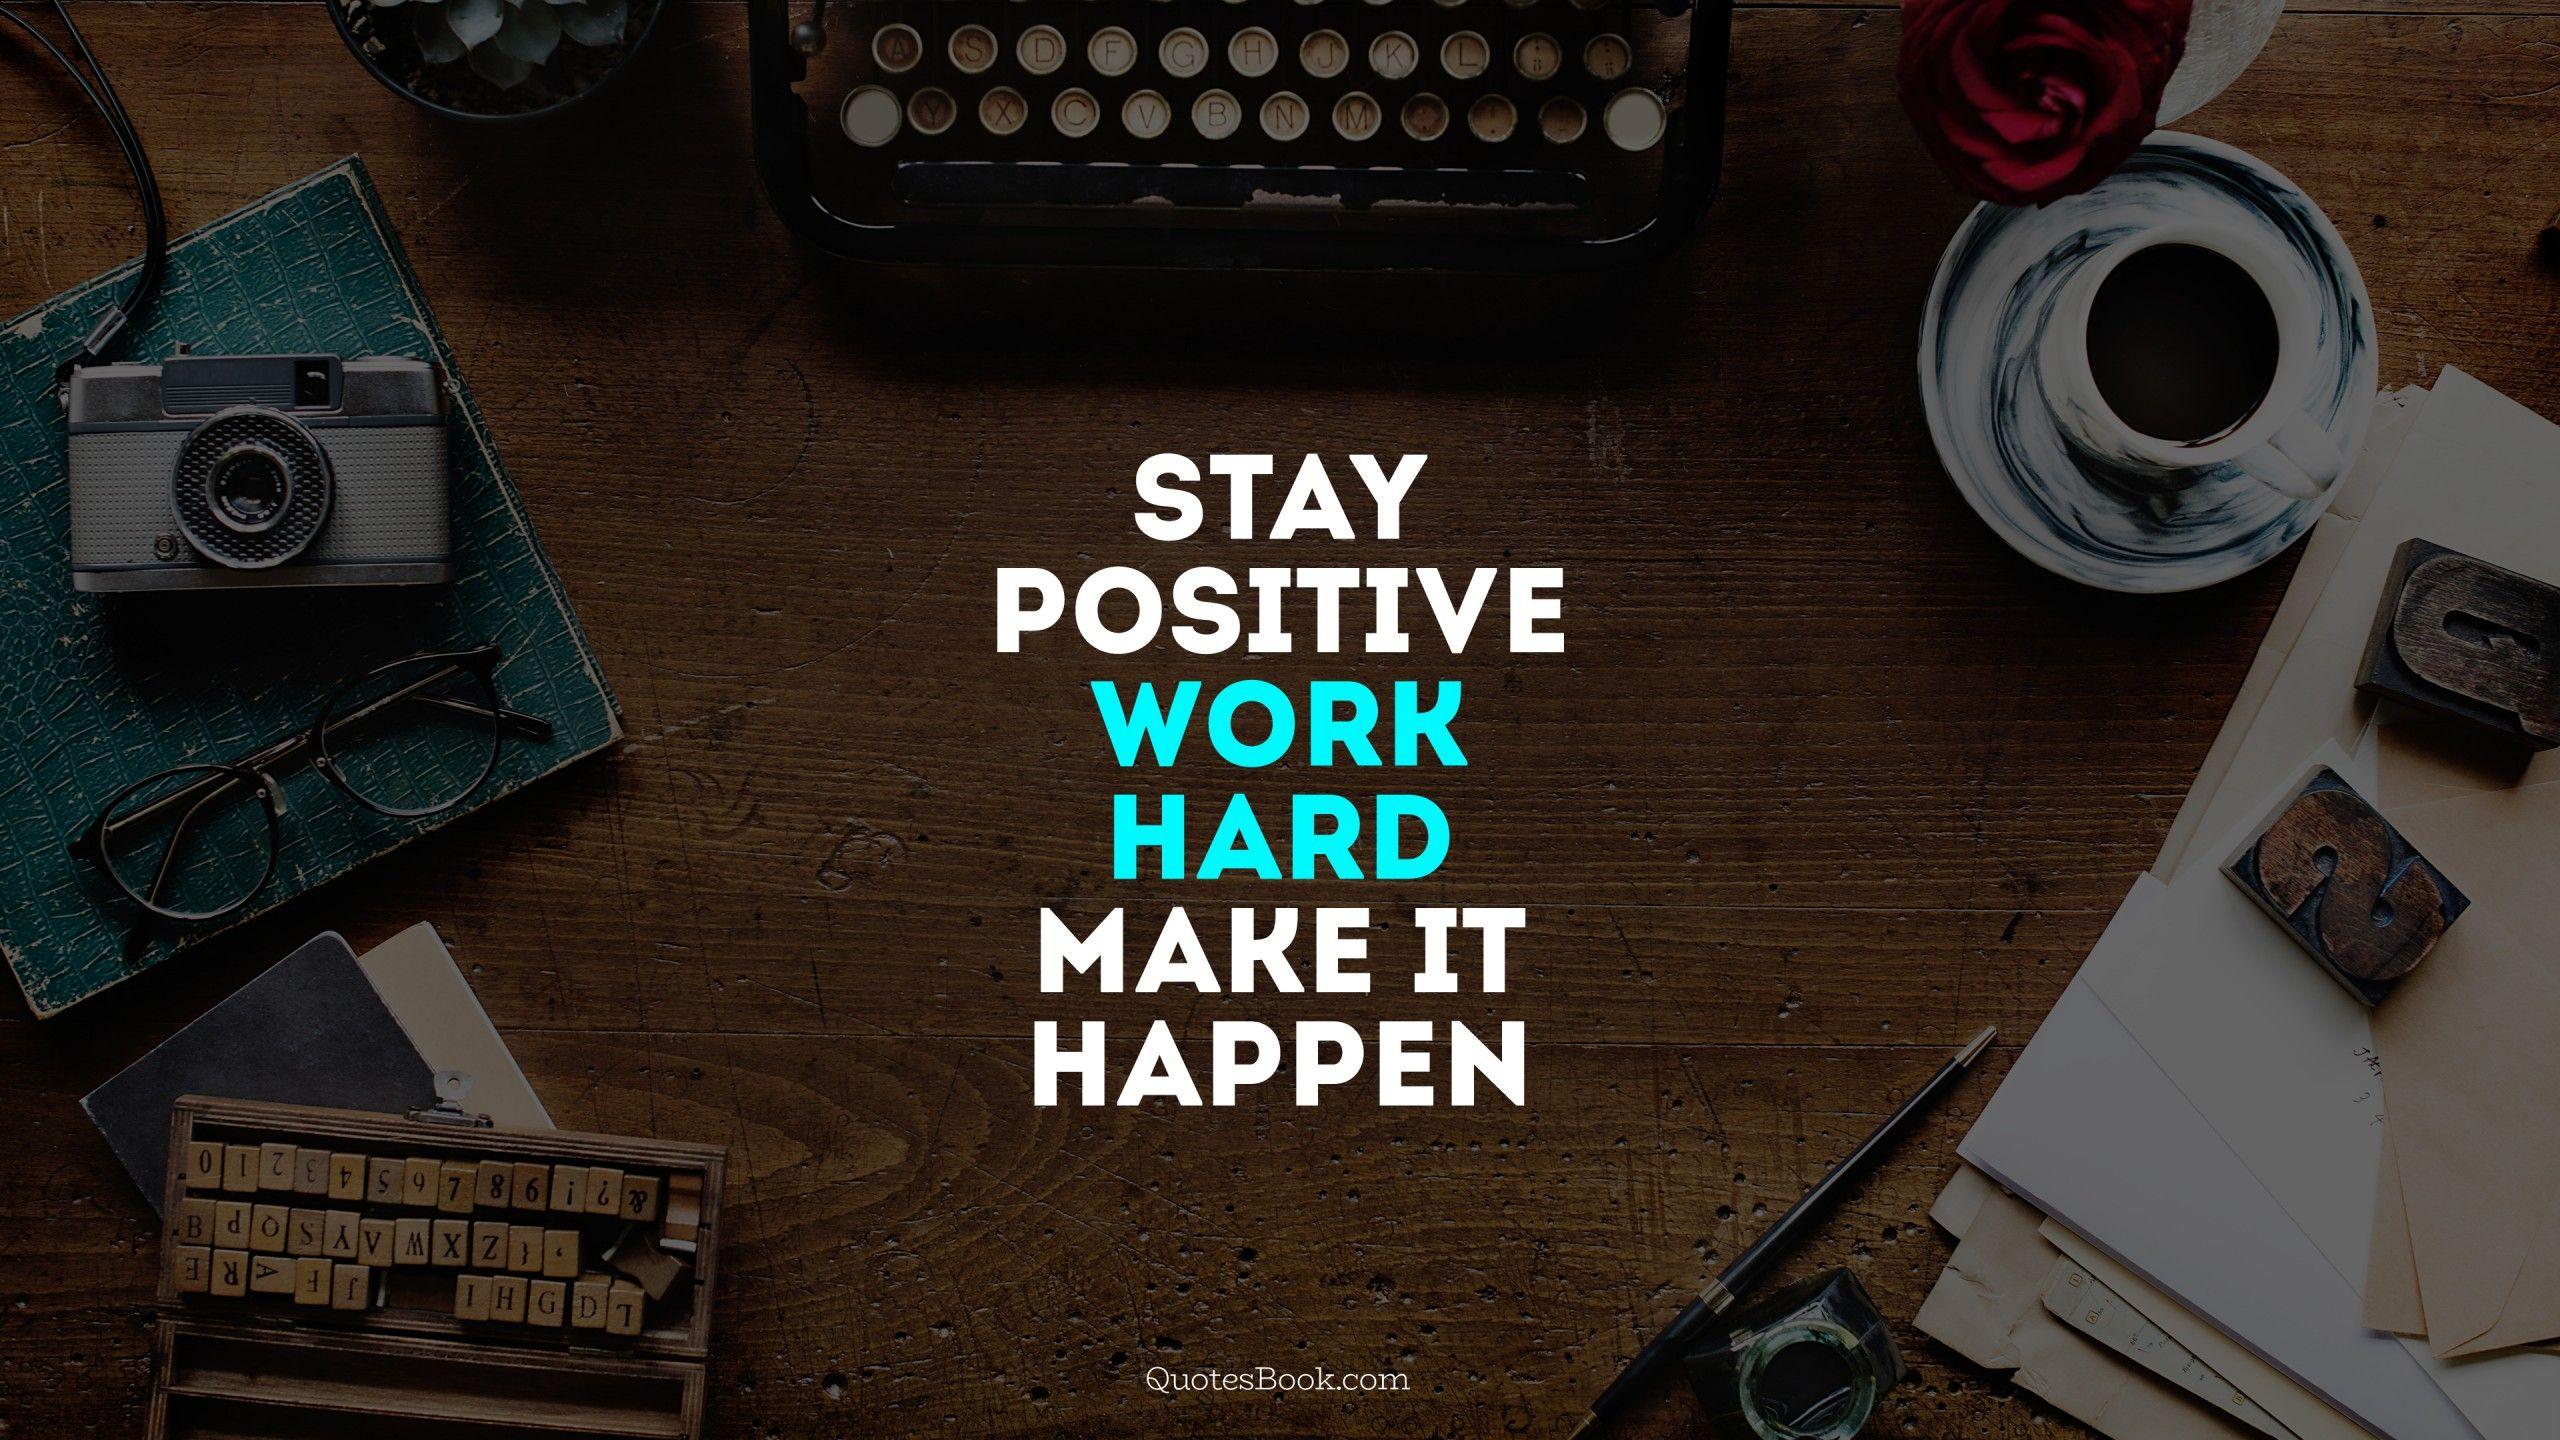 Work Hard Quotes Wallpapers - Top Free Work Hard Quotes Backgrounds